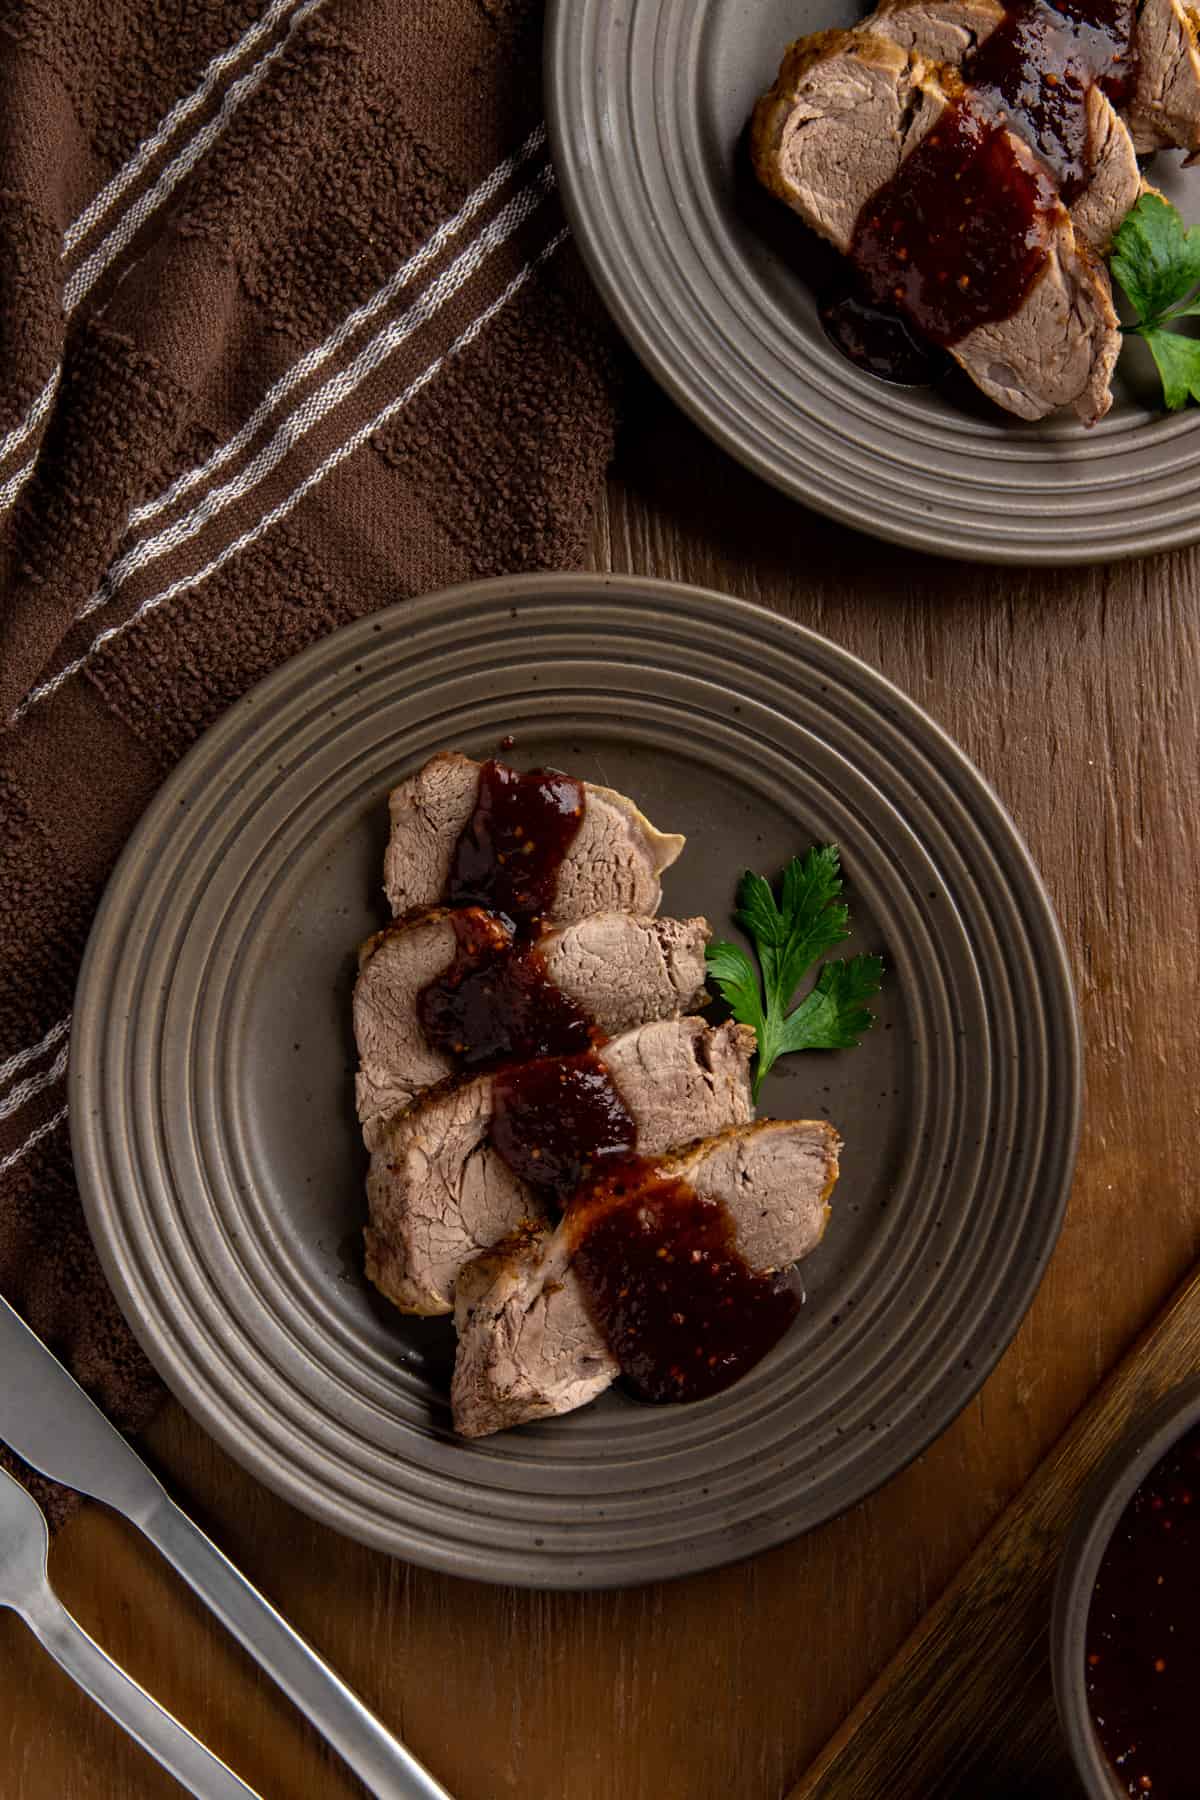 Four sliced of cooked pork tenderloin topped with sauce on brown plate.